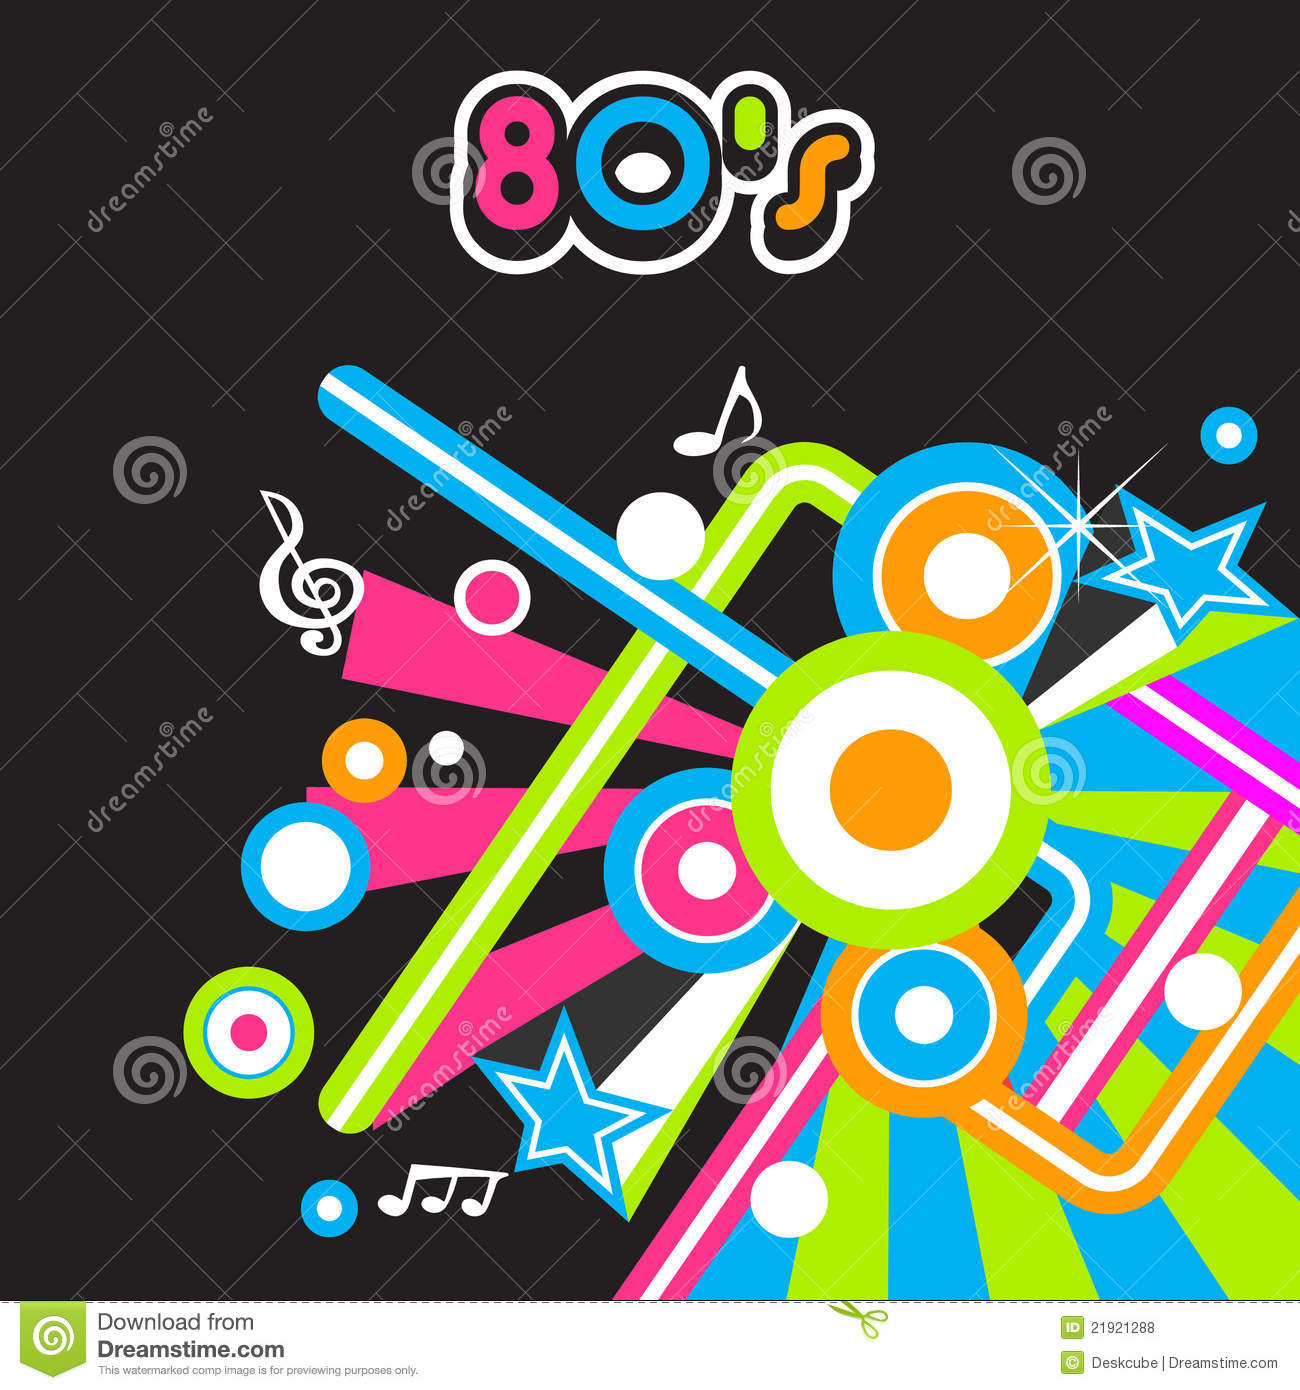 80 S Party Background Royalty Free Stock Photos   Image  21921288